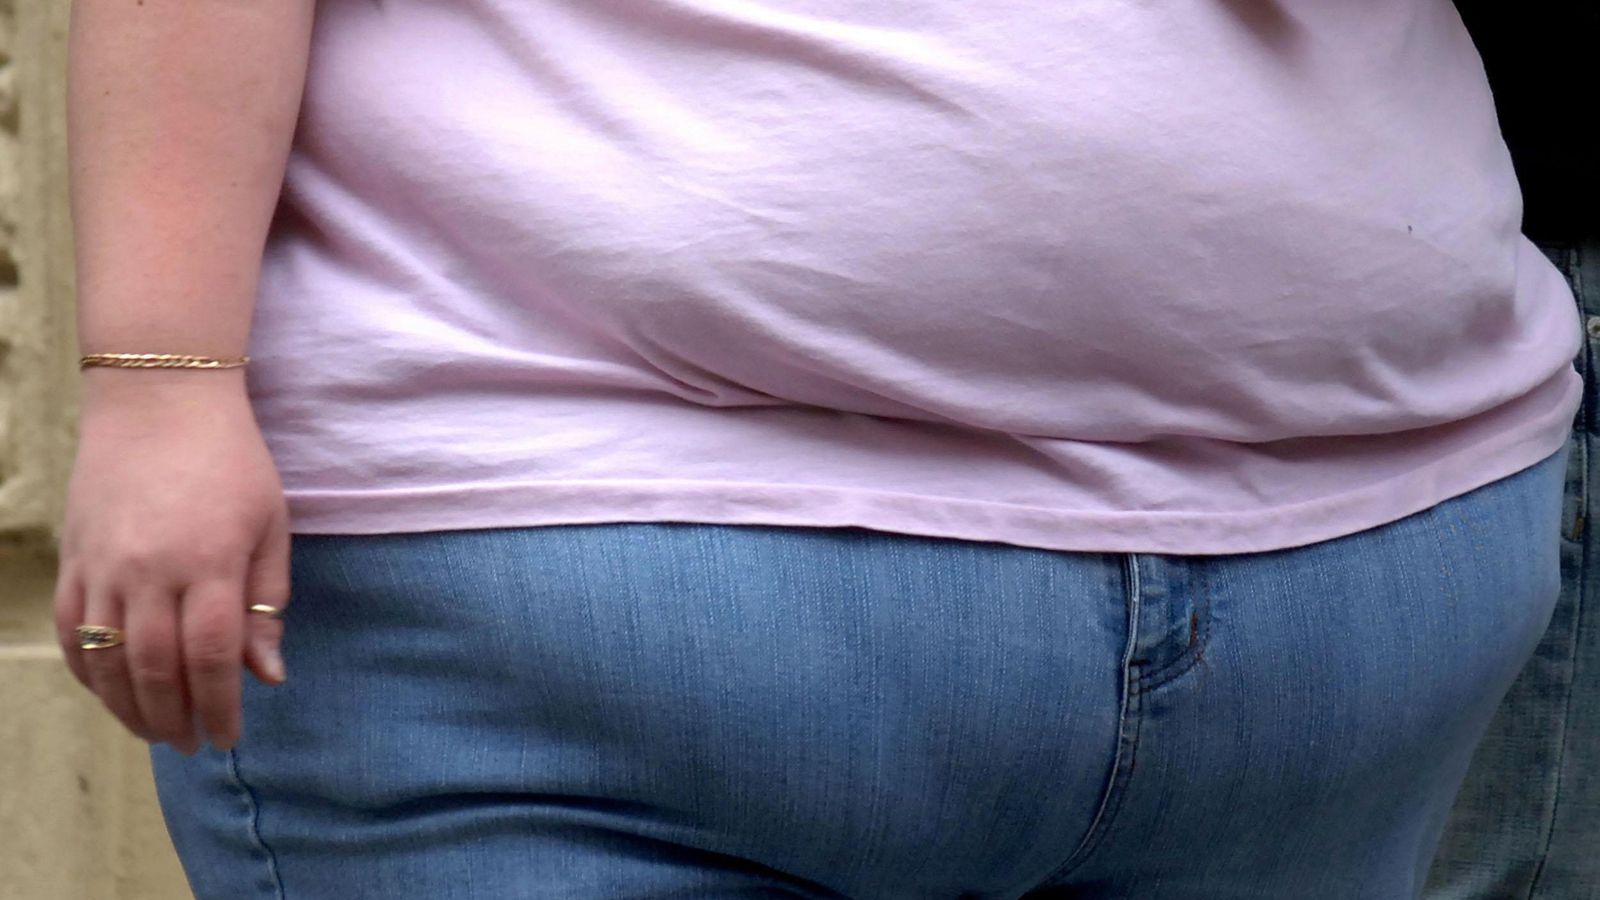 Obesity: Diabetes medicine hailed as a ‘game changer’ after trial reveals dramatic weight loss |  Science and technology news